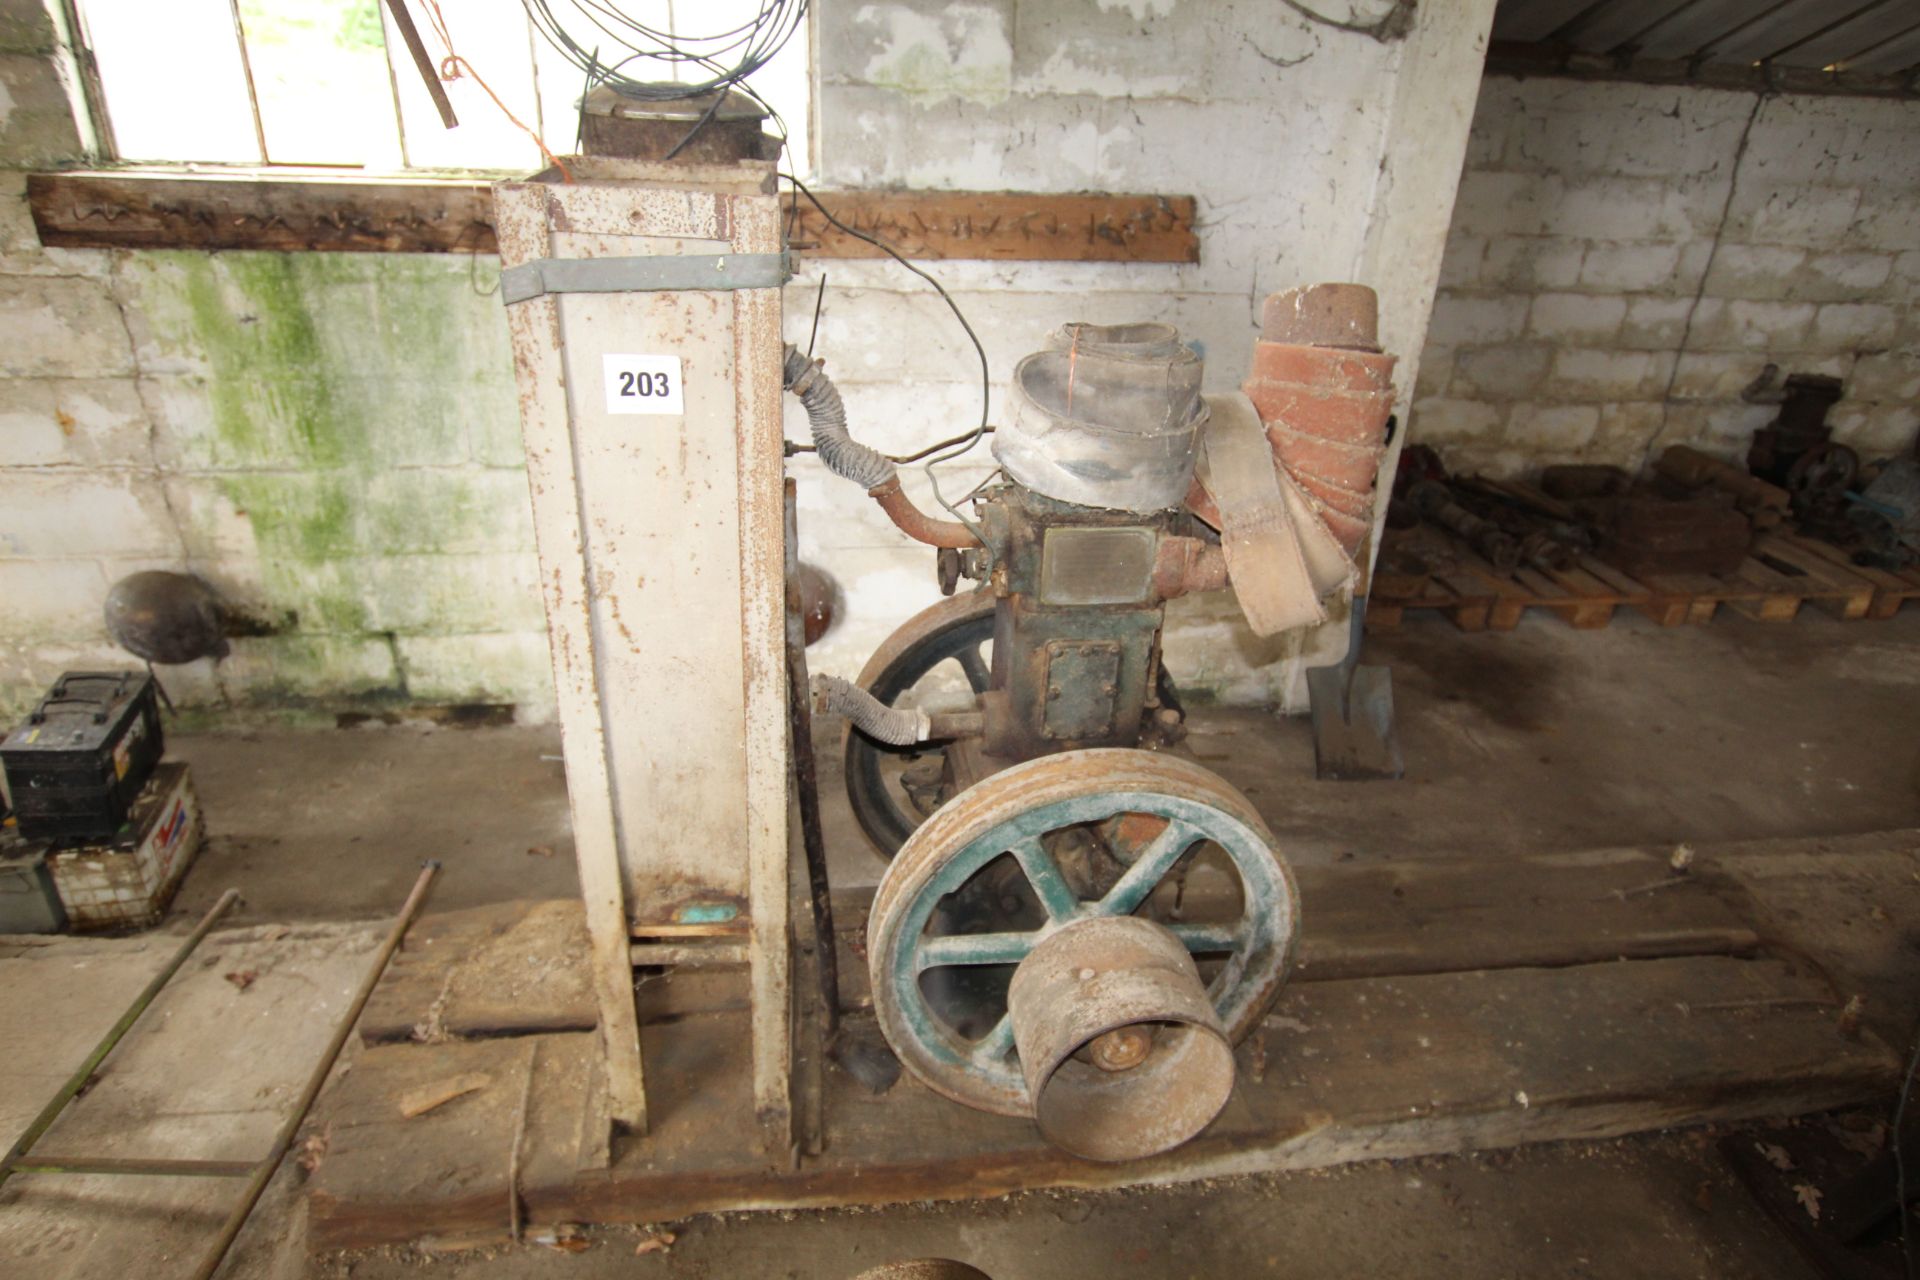 R A Lister & Co stationary engine. Owned from new. To be sold in situ and removed at purchaser’s